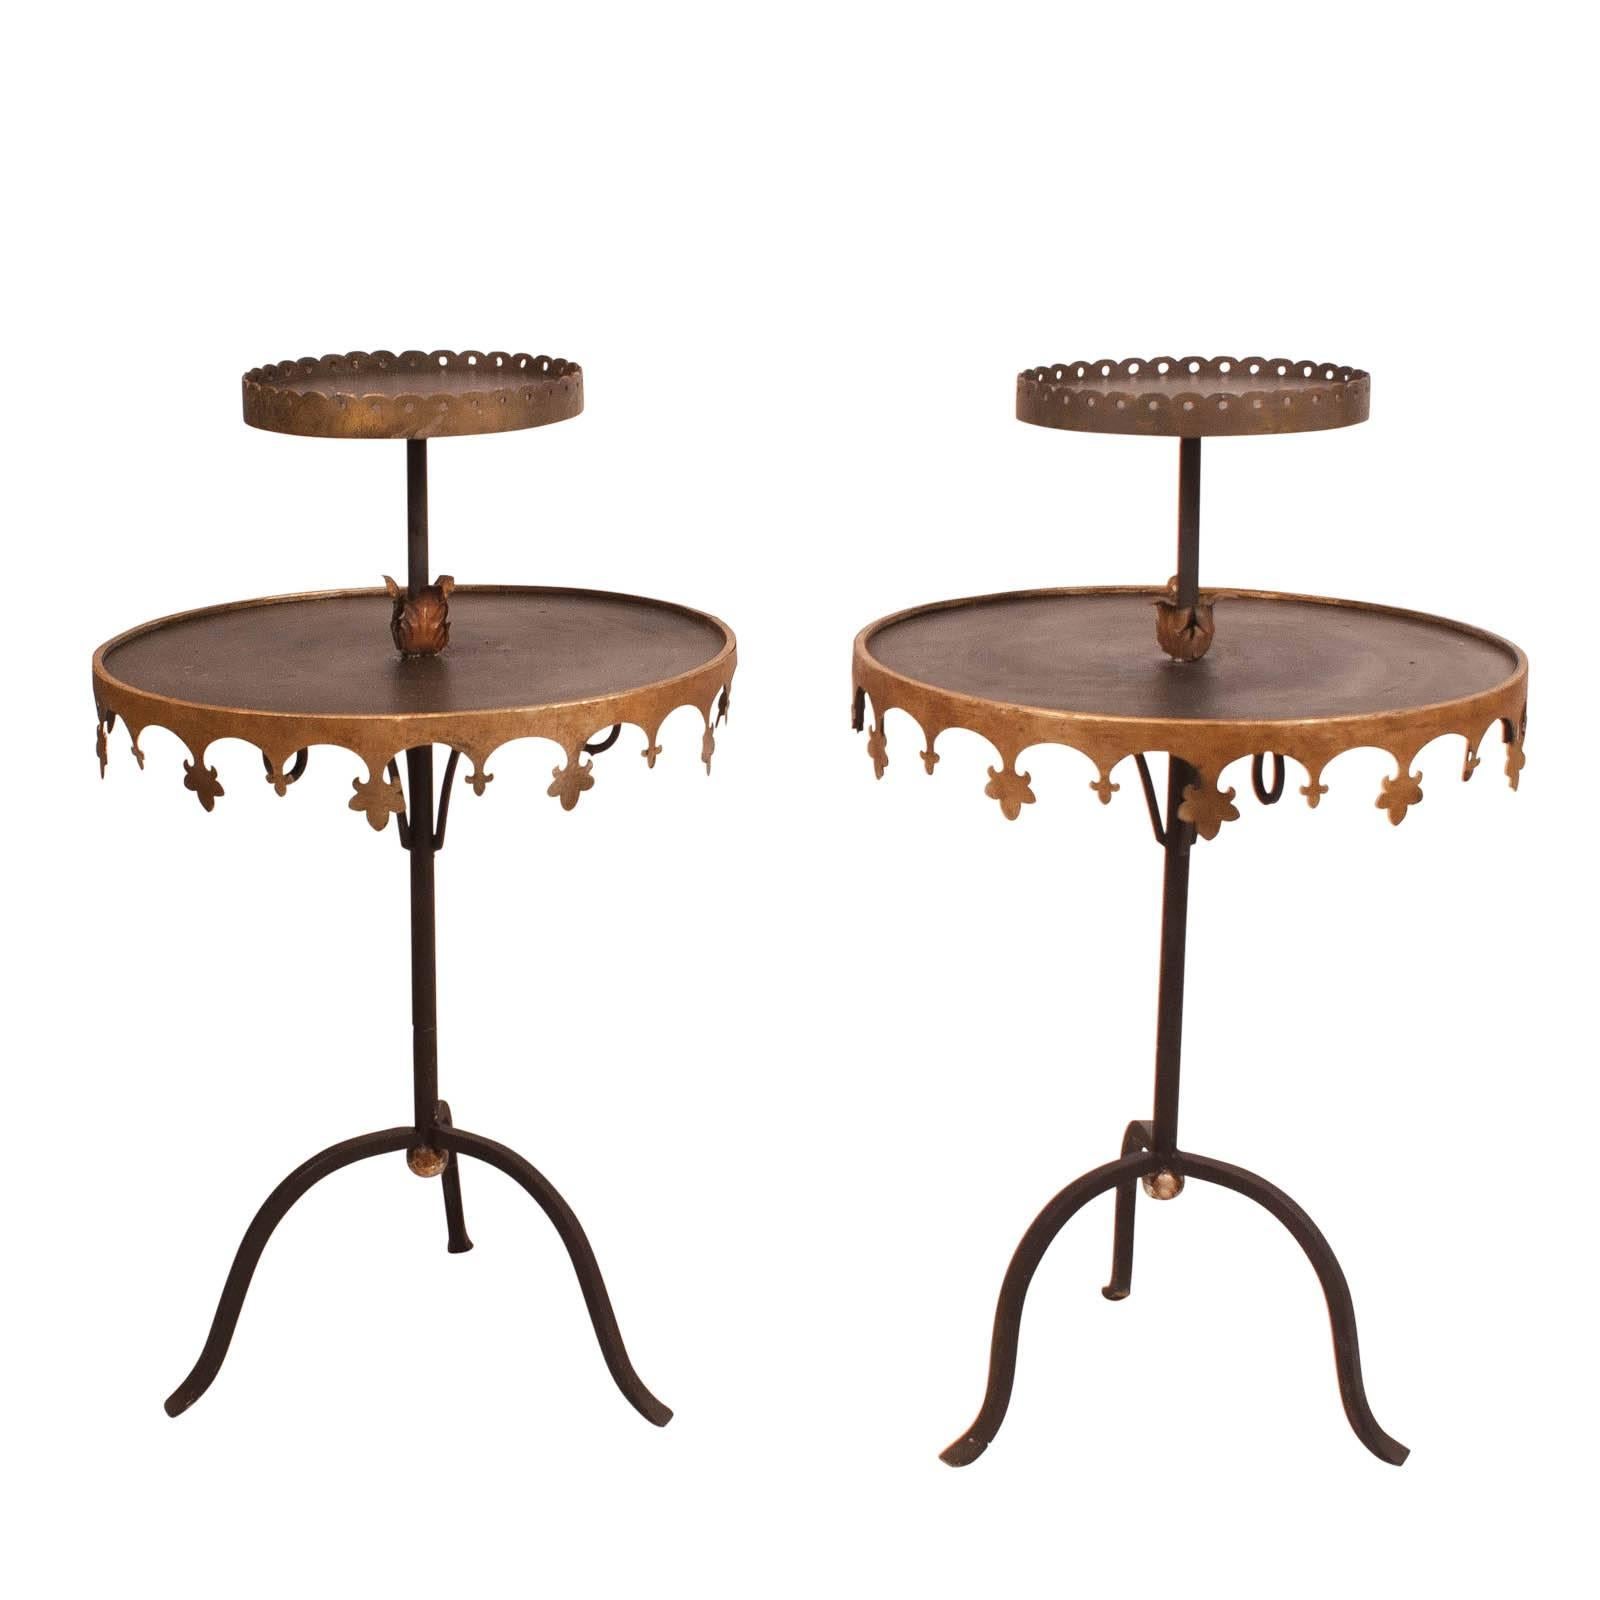 Pair of Vintage Tole Tables, USA, circa 1950